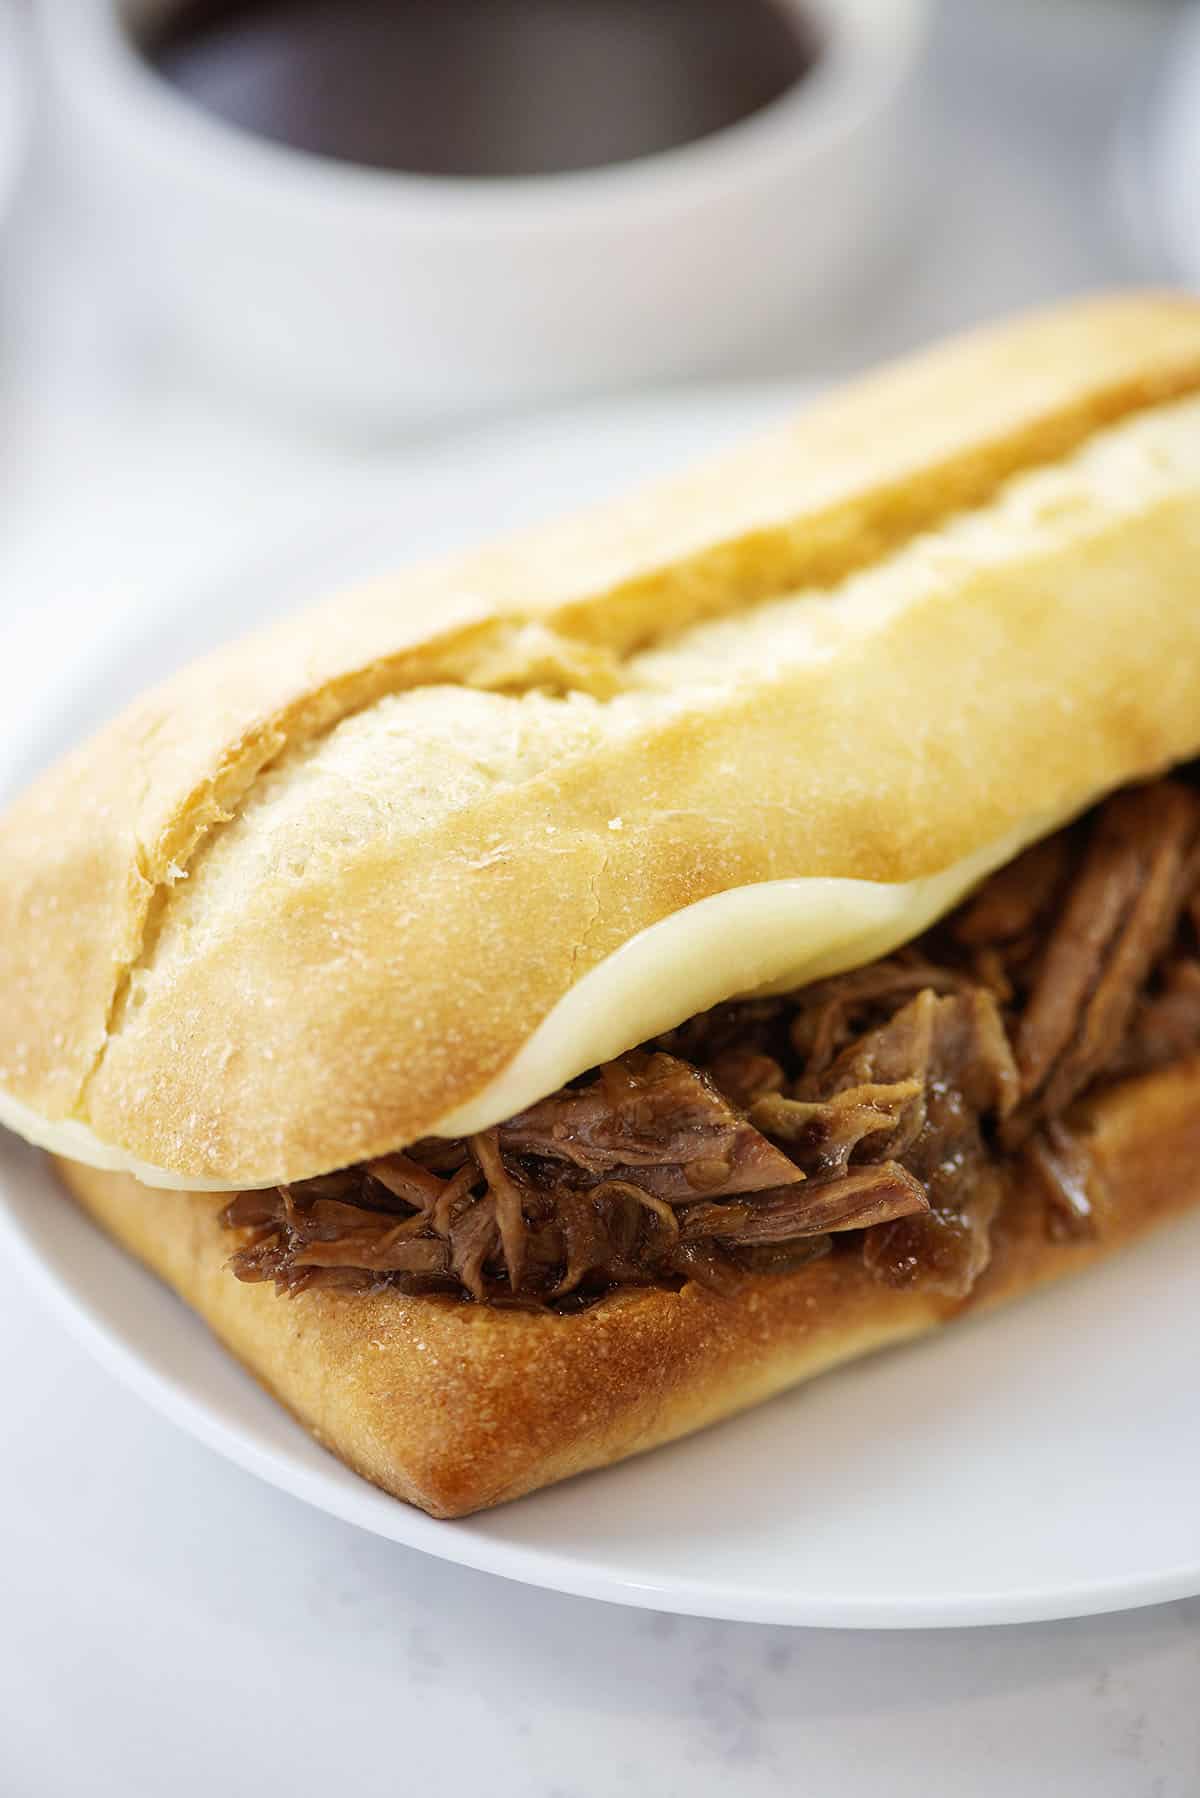 Close up view of French dip sandwich on plate.